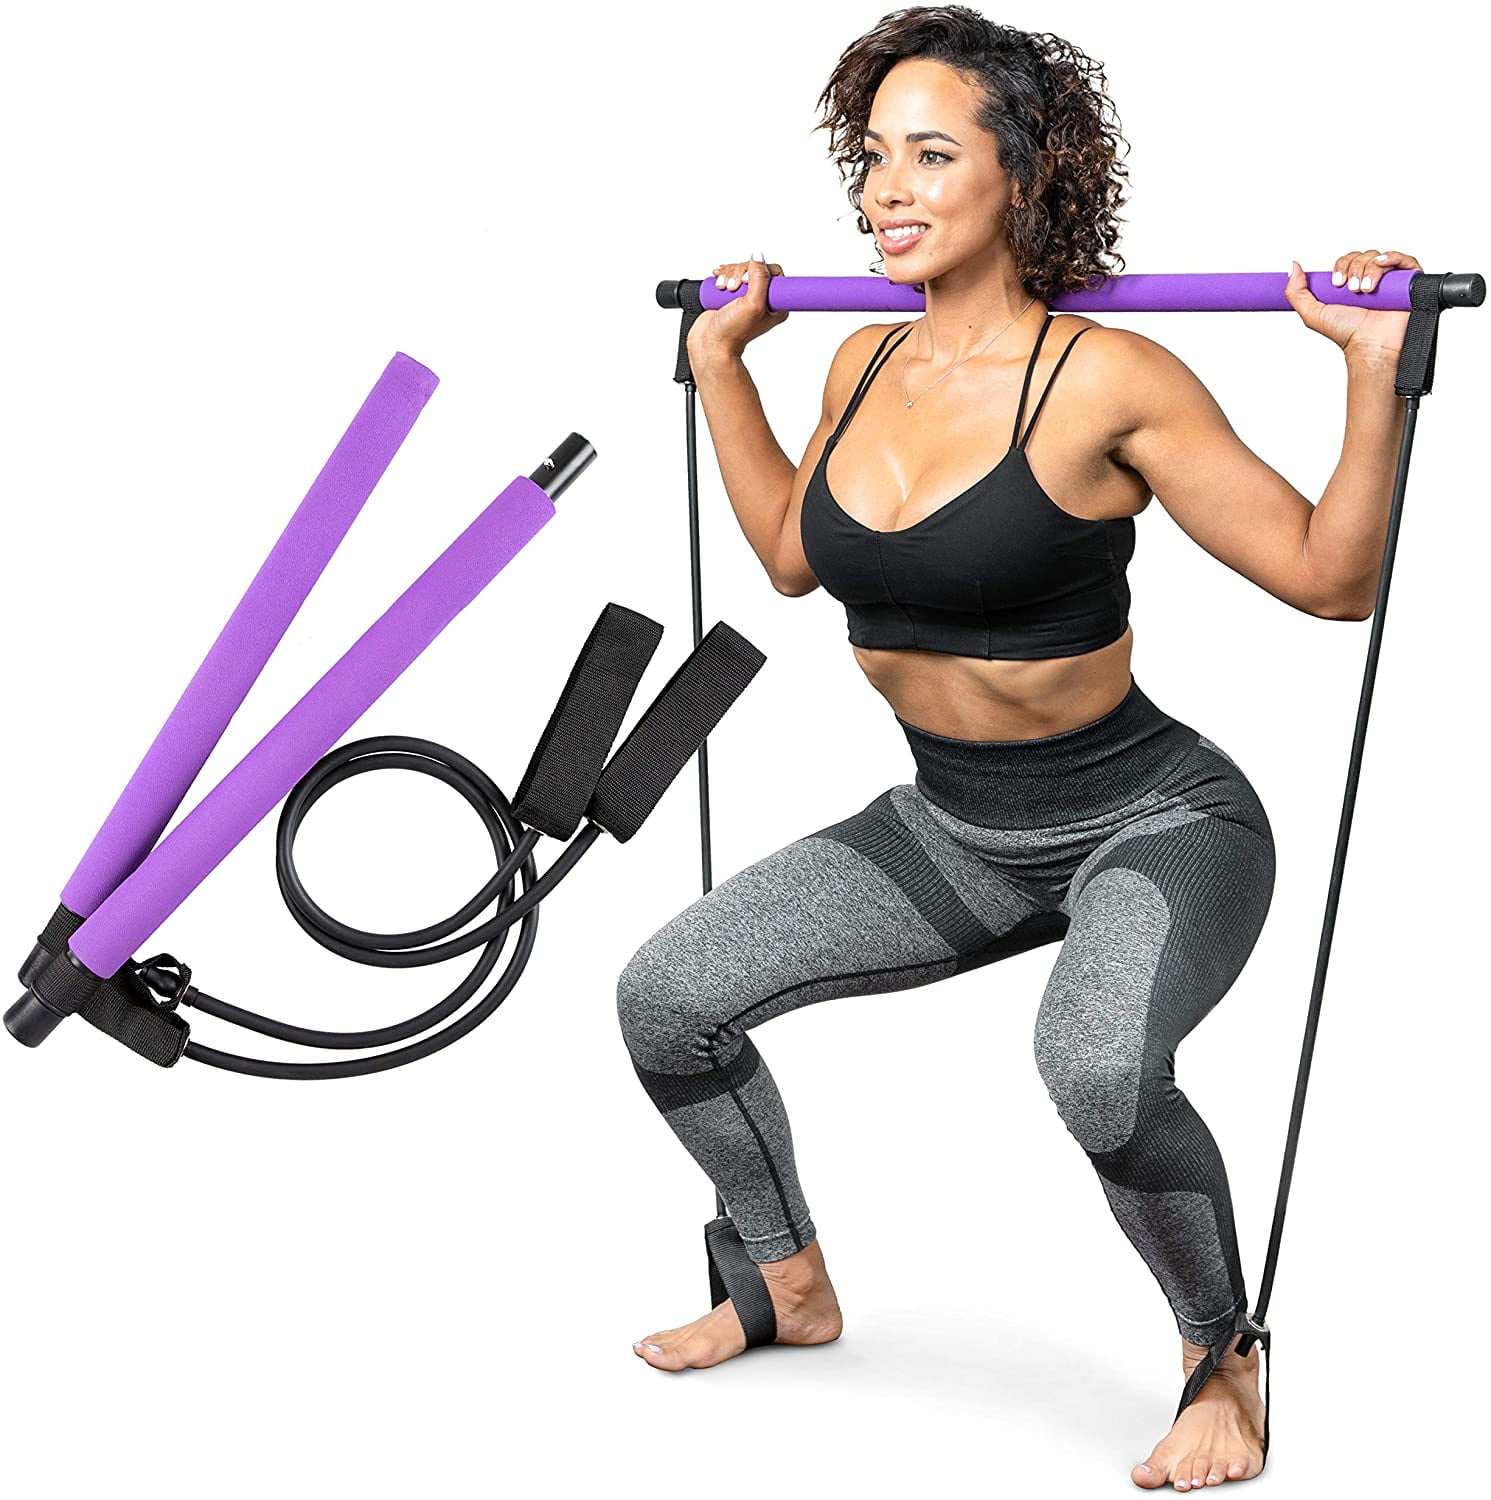 WORK ME Latex EXERCISE RESISTANCE BANDS Ladies HOME GYM Yoga CORE BODY Workout 